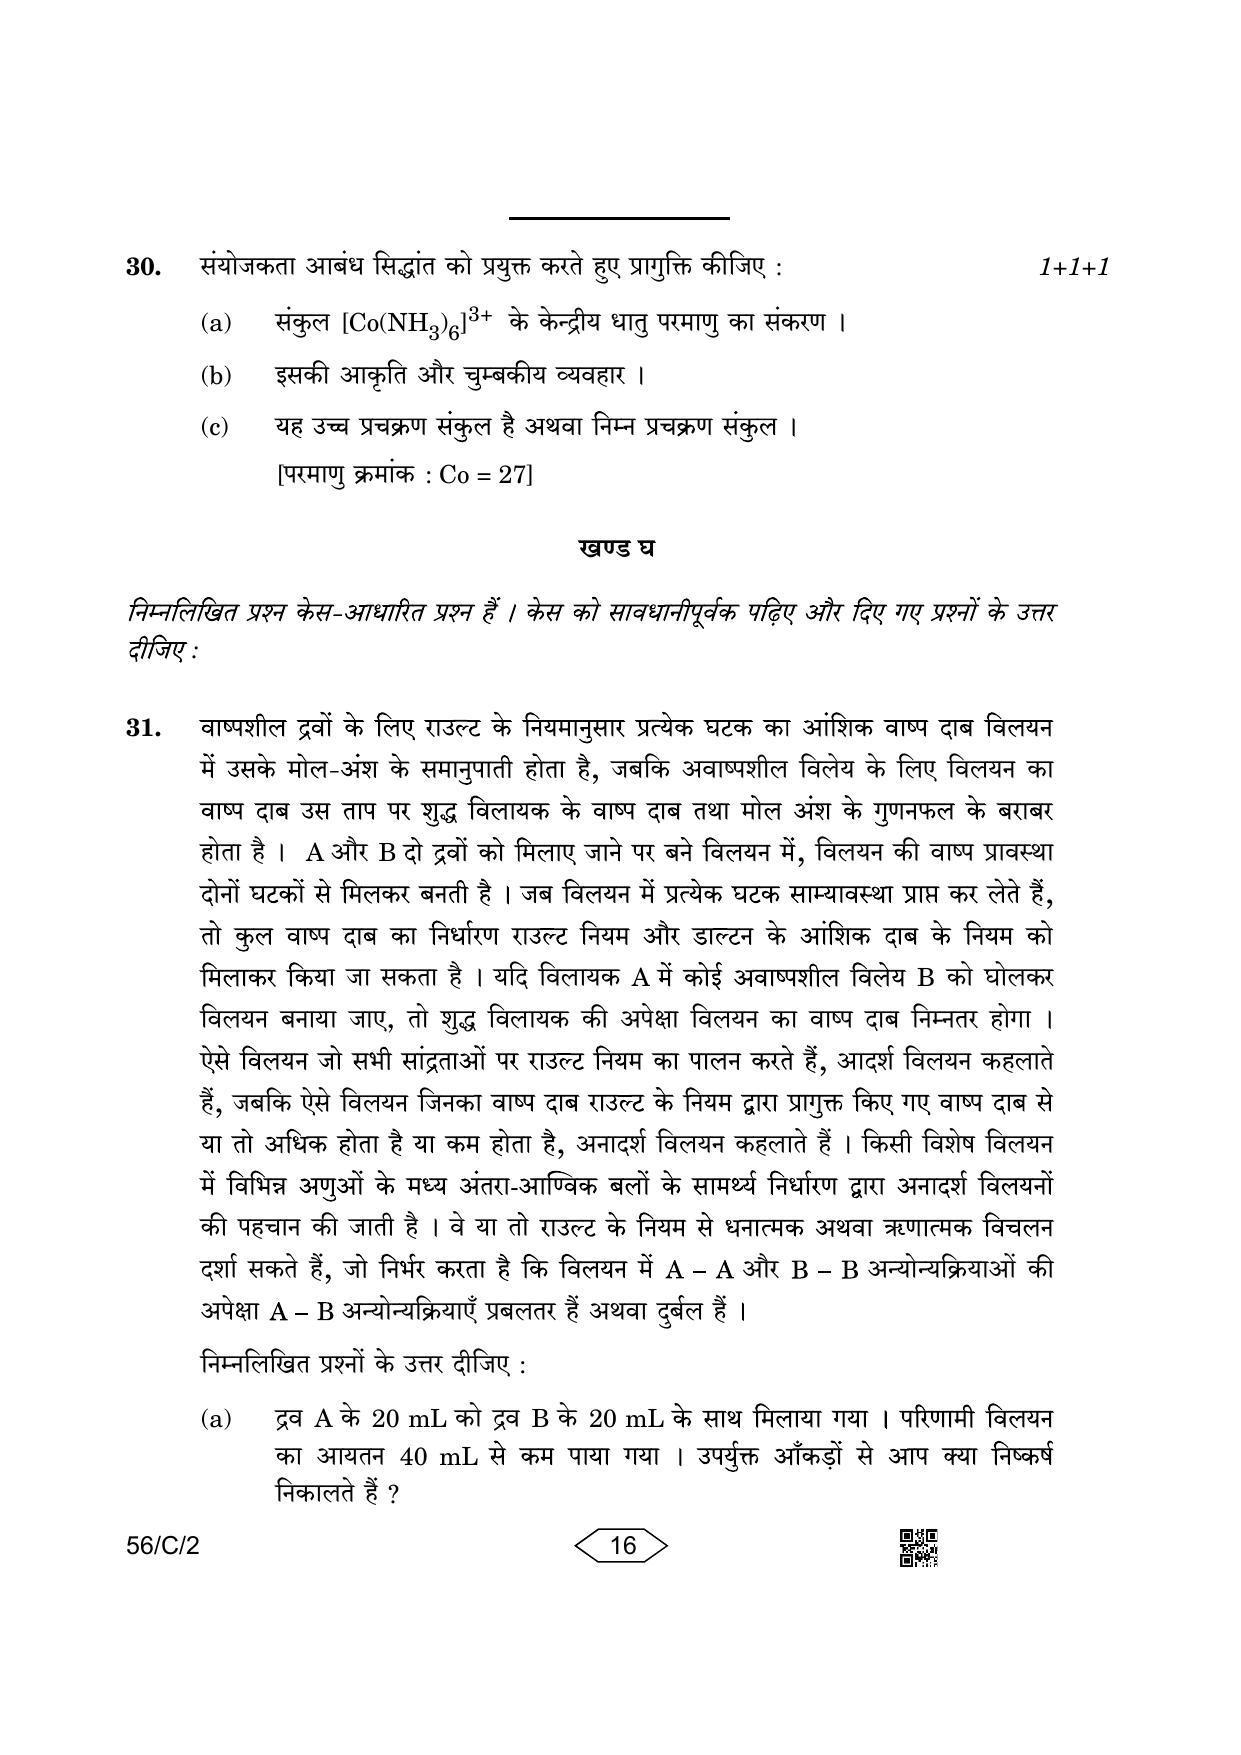 CBSE Class 12 56-2 Chemistry 2023 (Compartment) Question Paper - Page 16